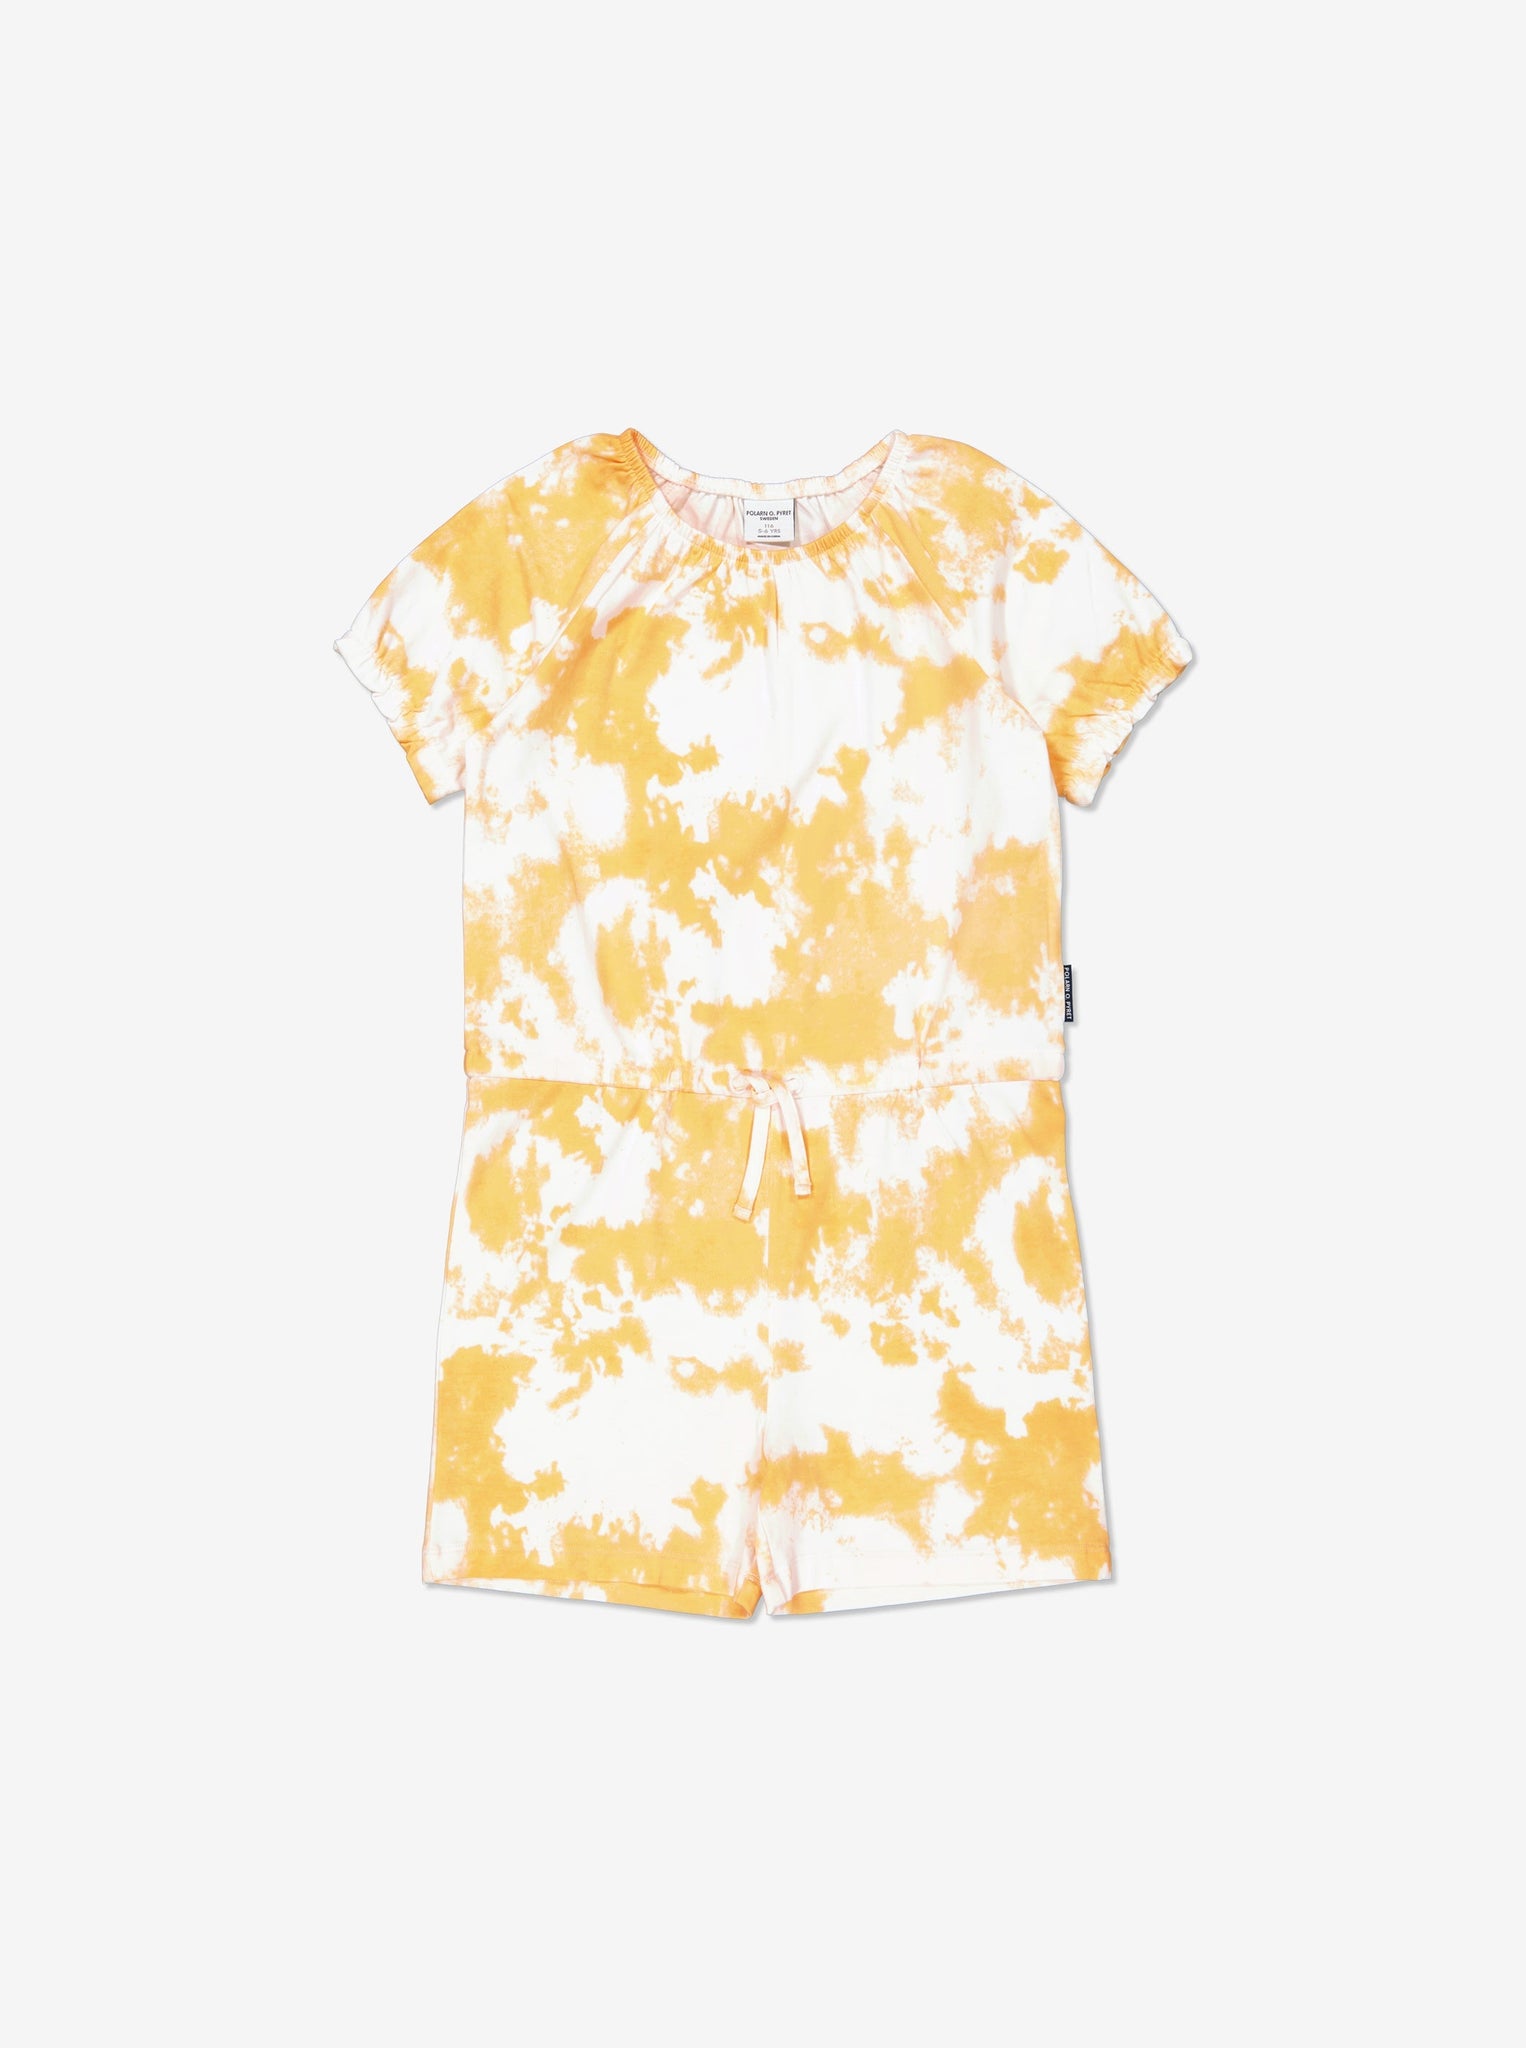 Tie-Dye Yellow Girls Playsuit from Polarn O. Pyret Kidswear. Made using sustainable sourced materials.